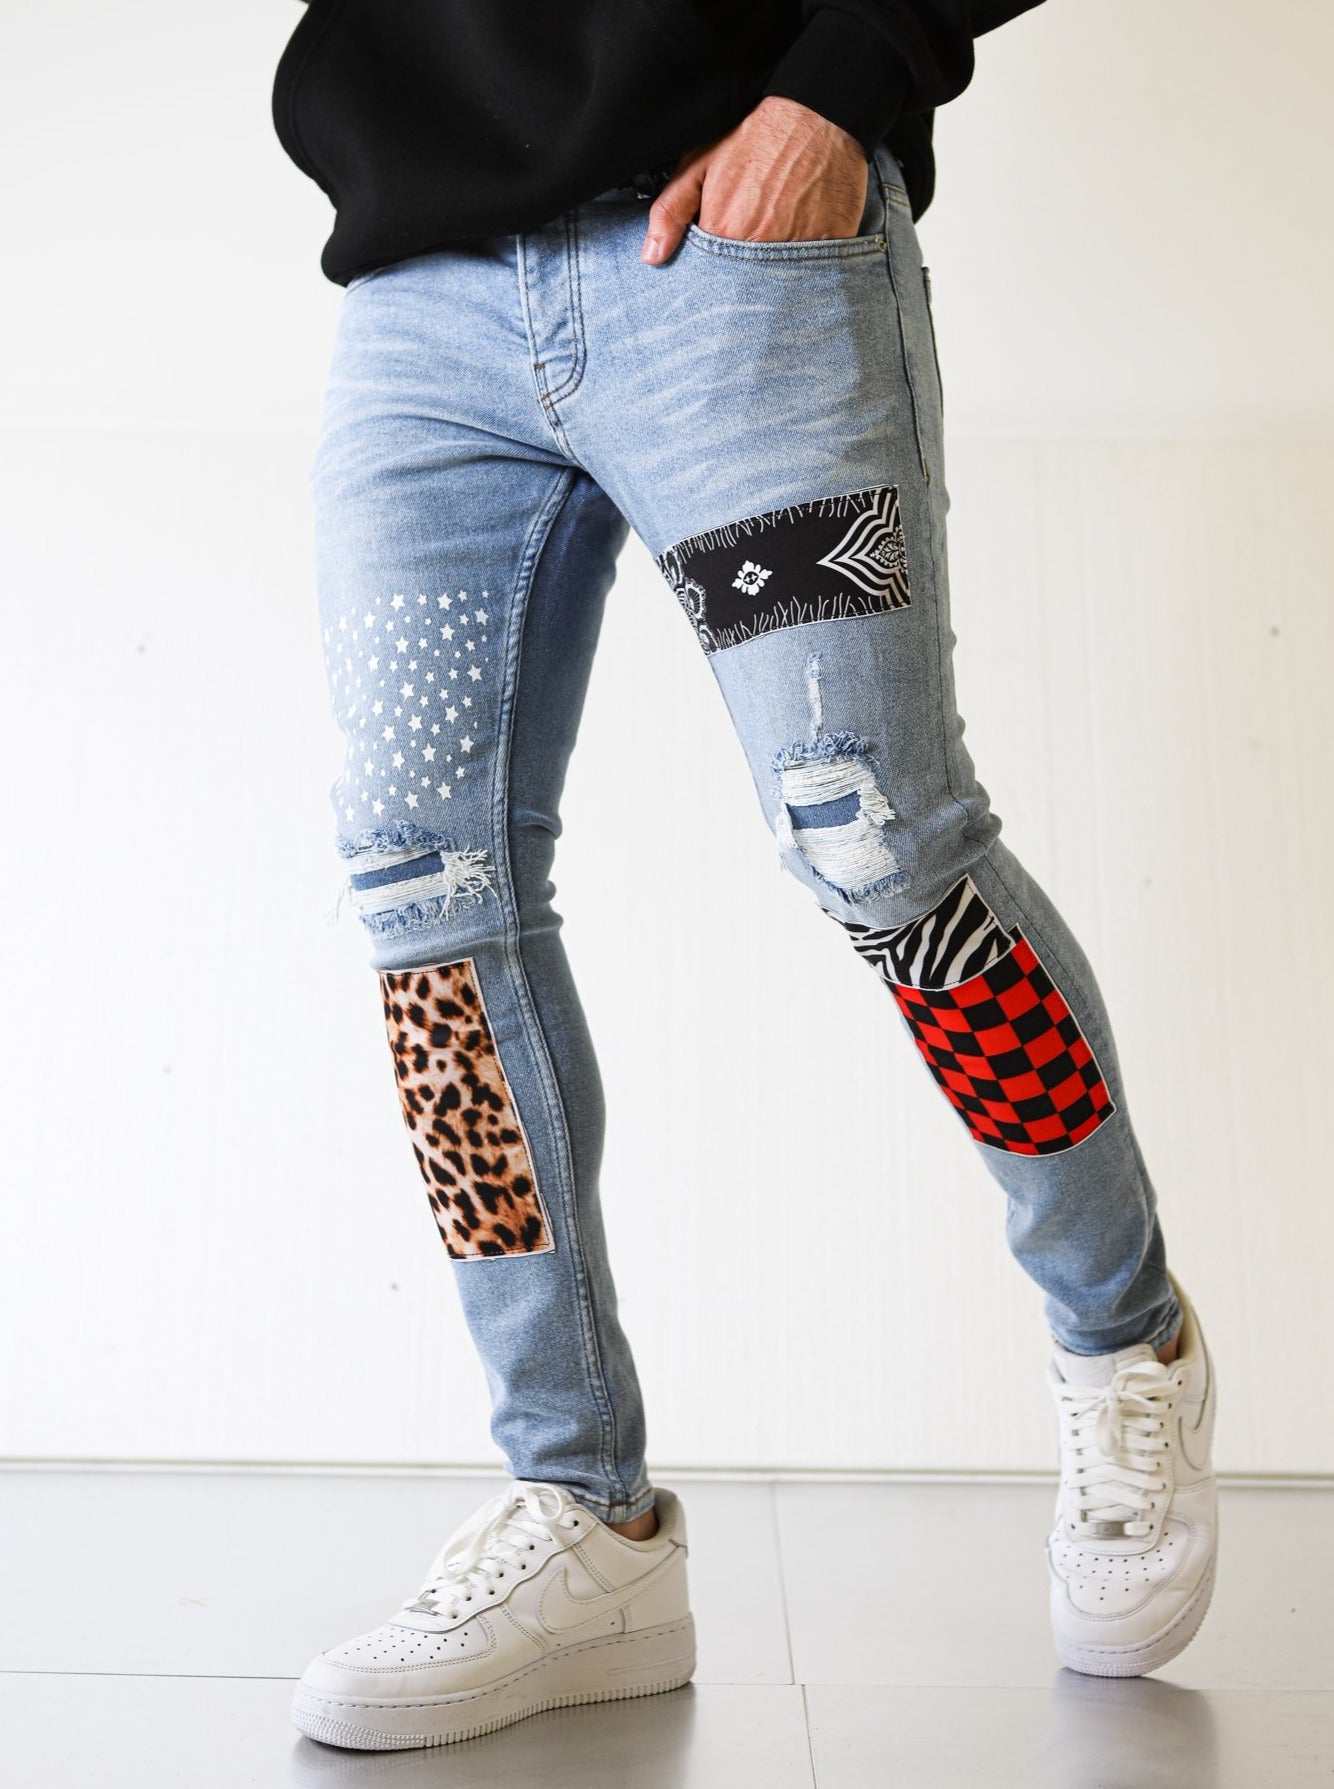 Patched Printed Blue Jeans - UNEFFECTED STUDIOS® - JEANS - UNEFFECTED